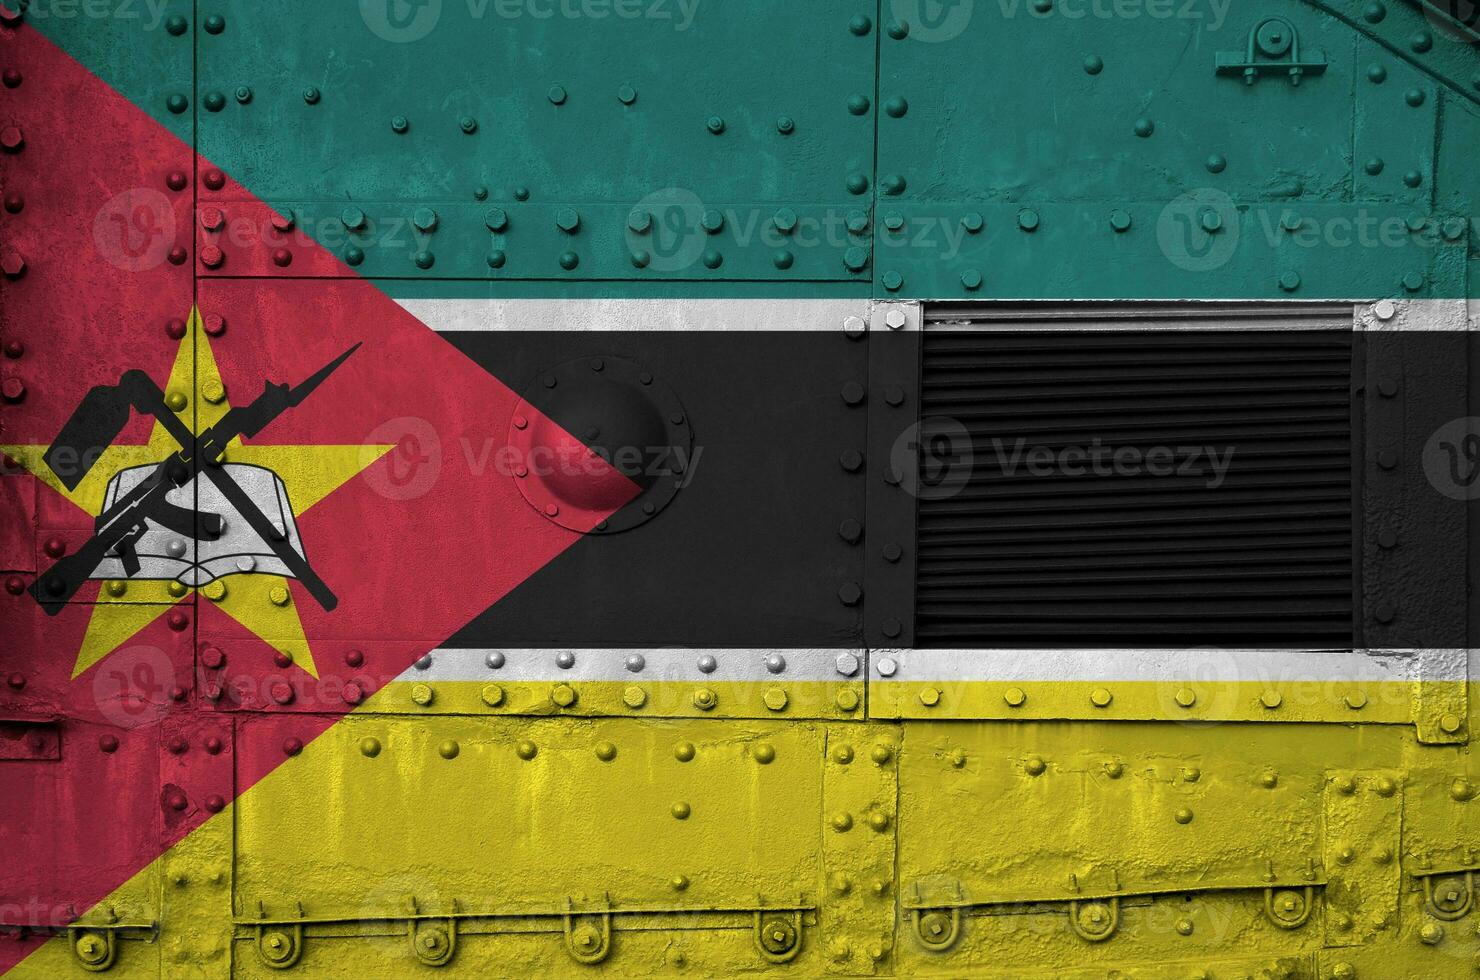 Mozambique flag depicted on side part of military armored tank closeup. Army forces conceptual background photo